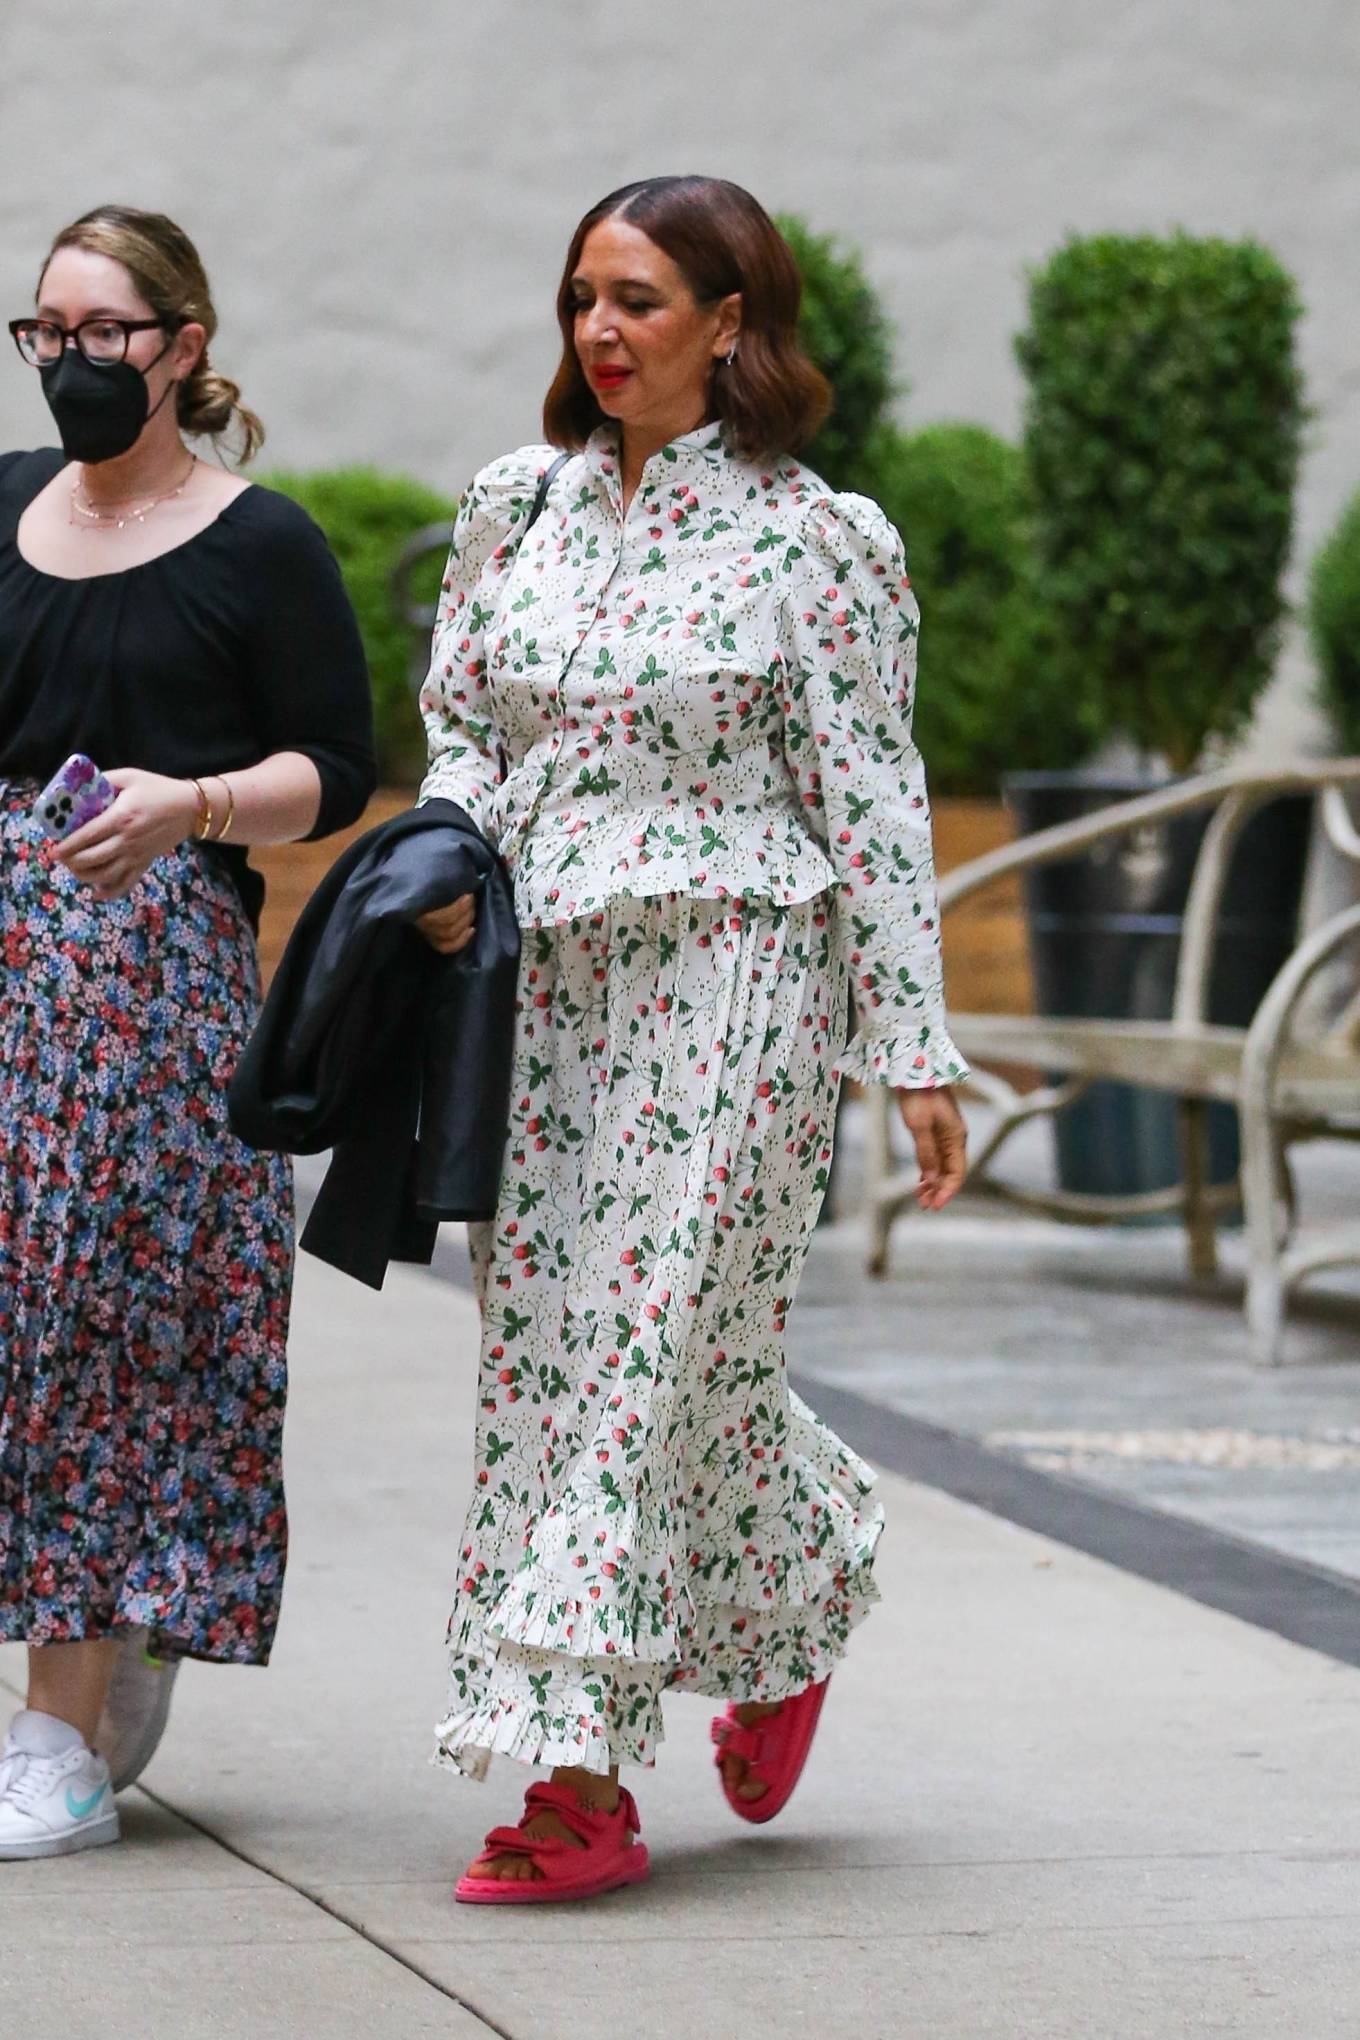 Maya Rudolph 2022 : Maya Rudolph – In a floral dress steps out in New York-07